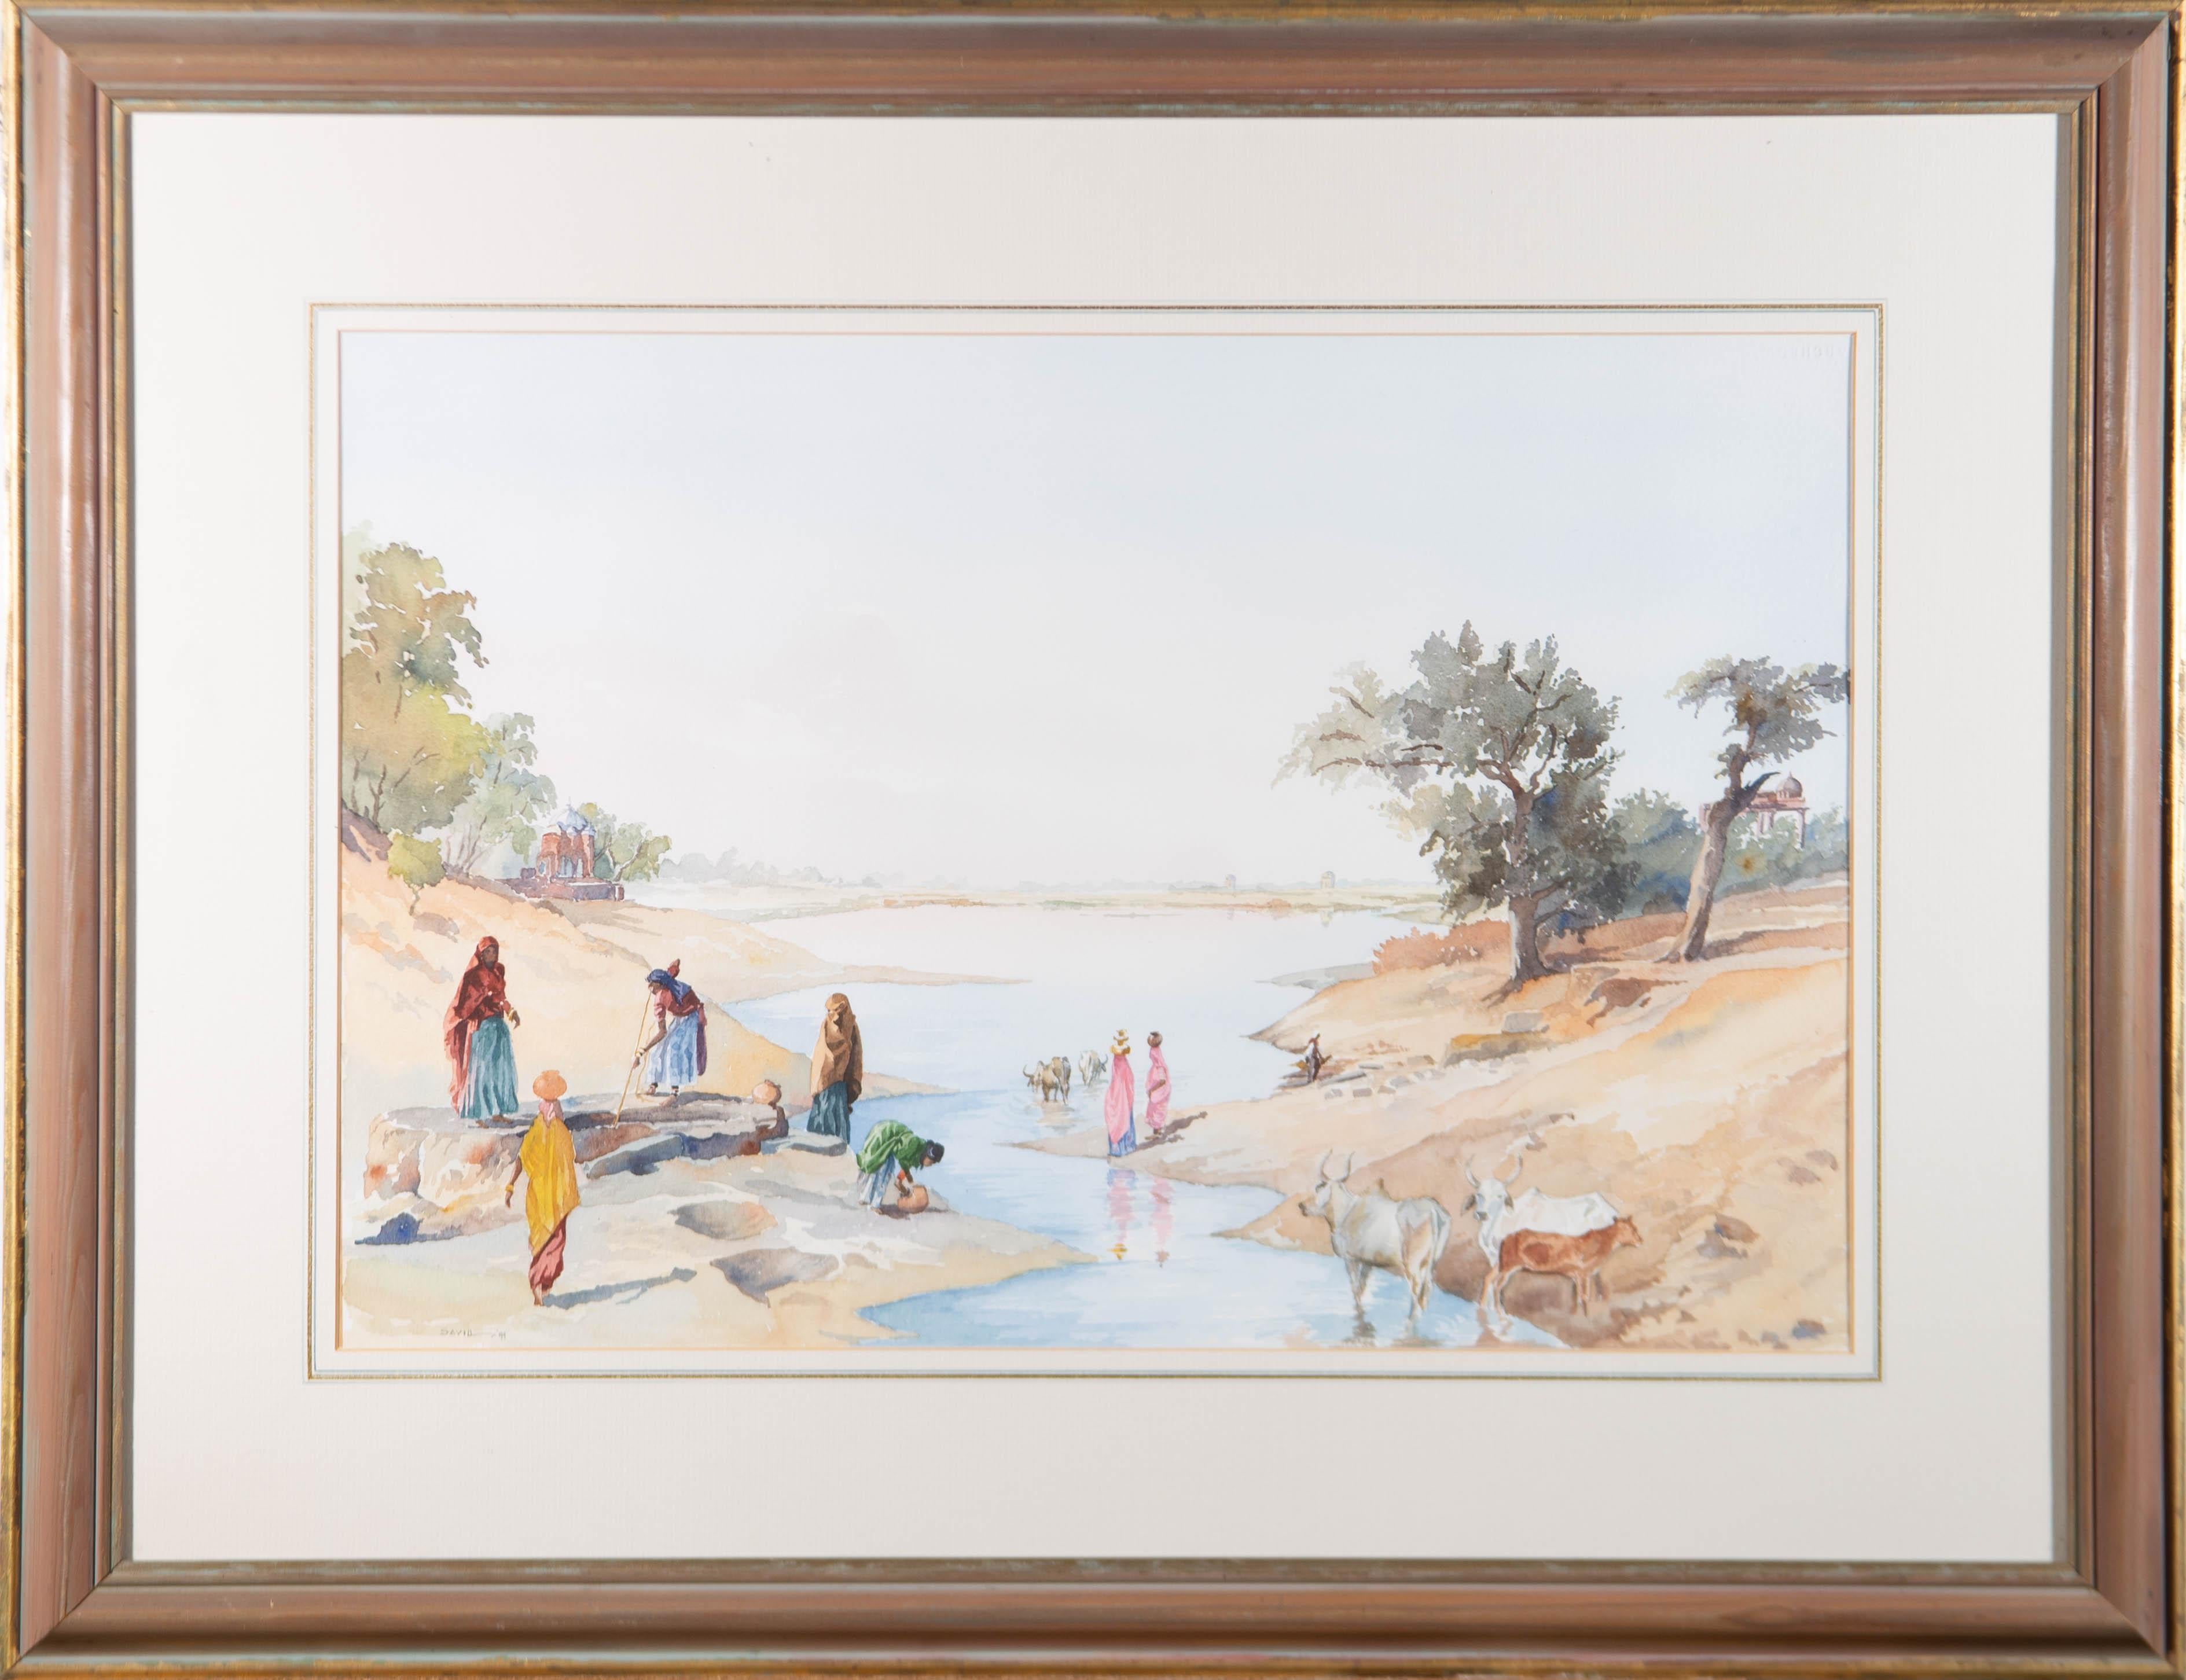 A fine watercolour painting with gouache details by the artist Jonathan Savill. The scene depicts a view in Rajasthan, India, with several women by a well. In precise brush strokes and thoughtful use of colour, the artist created a captivating and